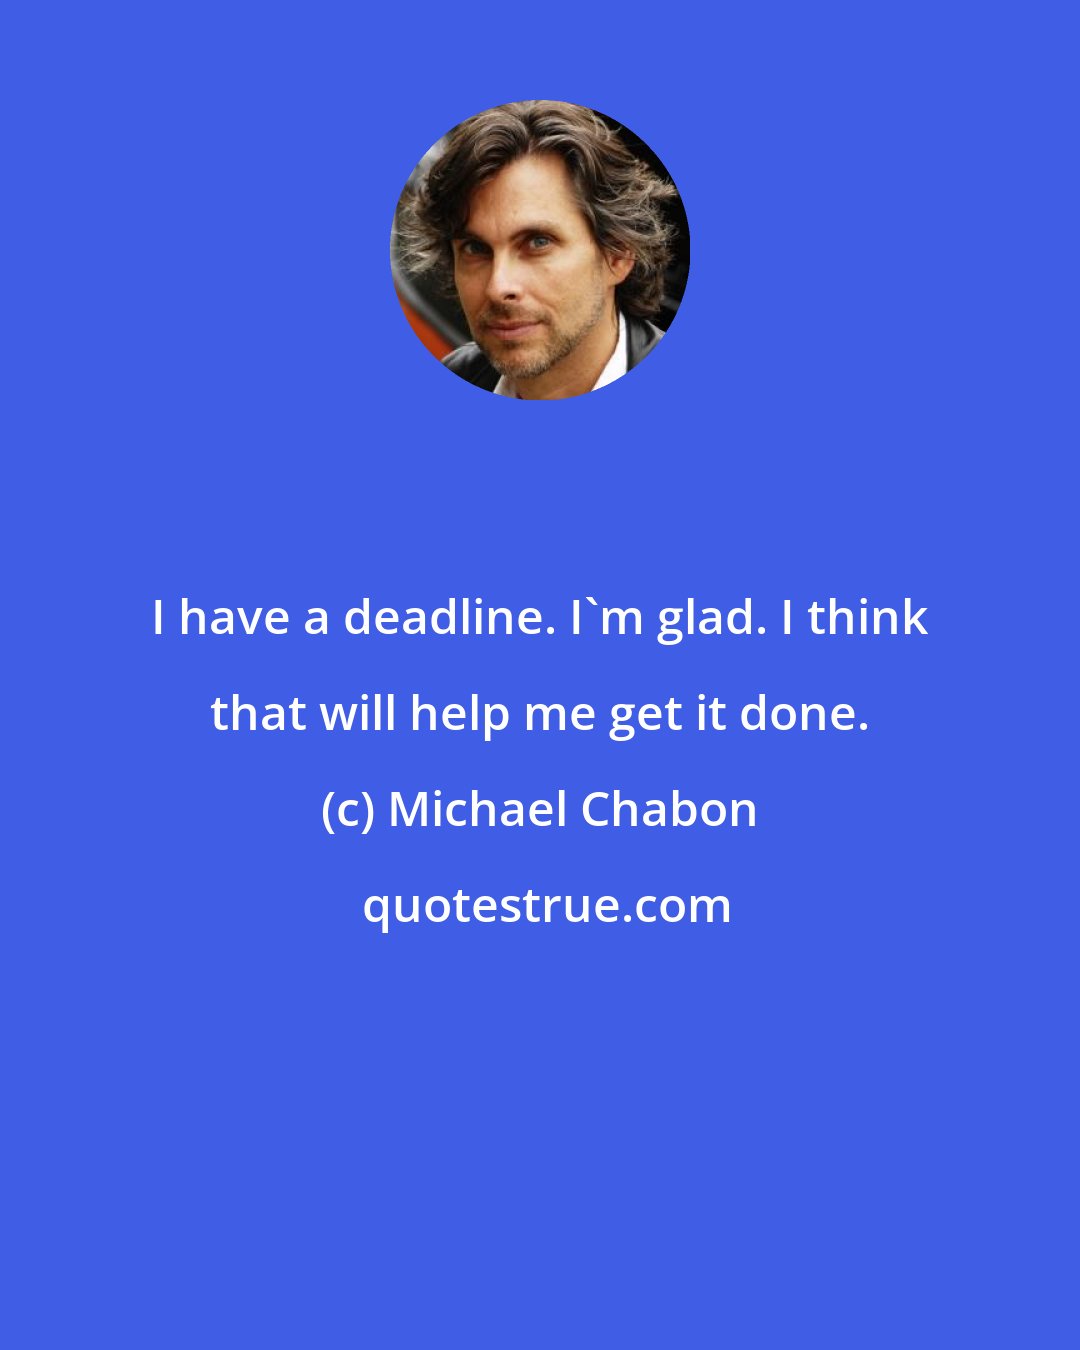 Michael Chabon: I have a deadline. I'm glad. I think that will help me get it done.